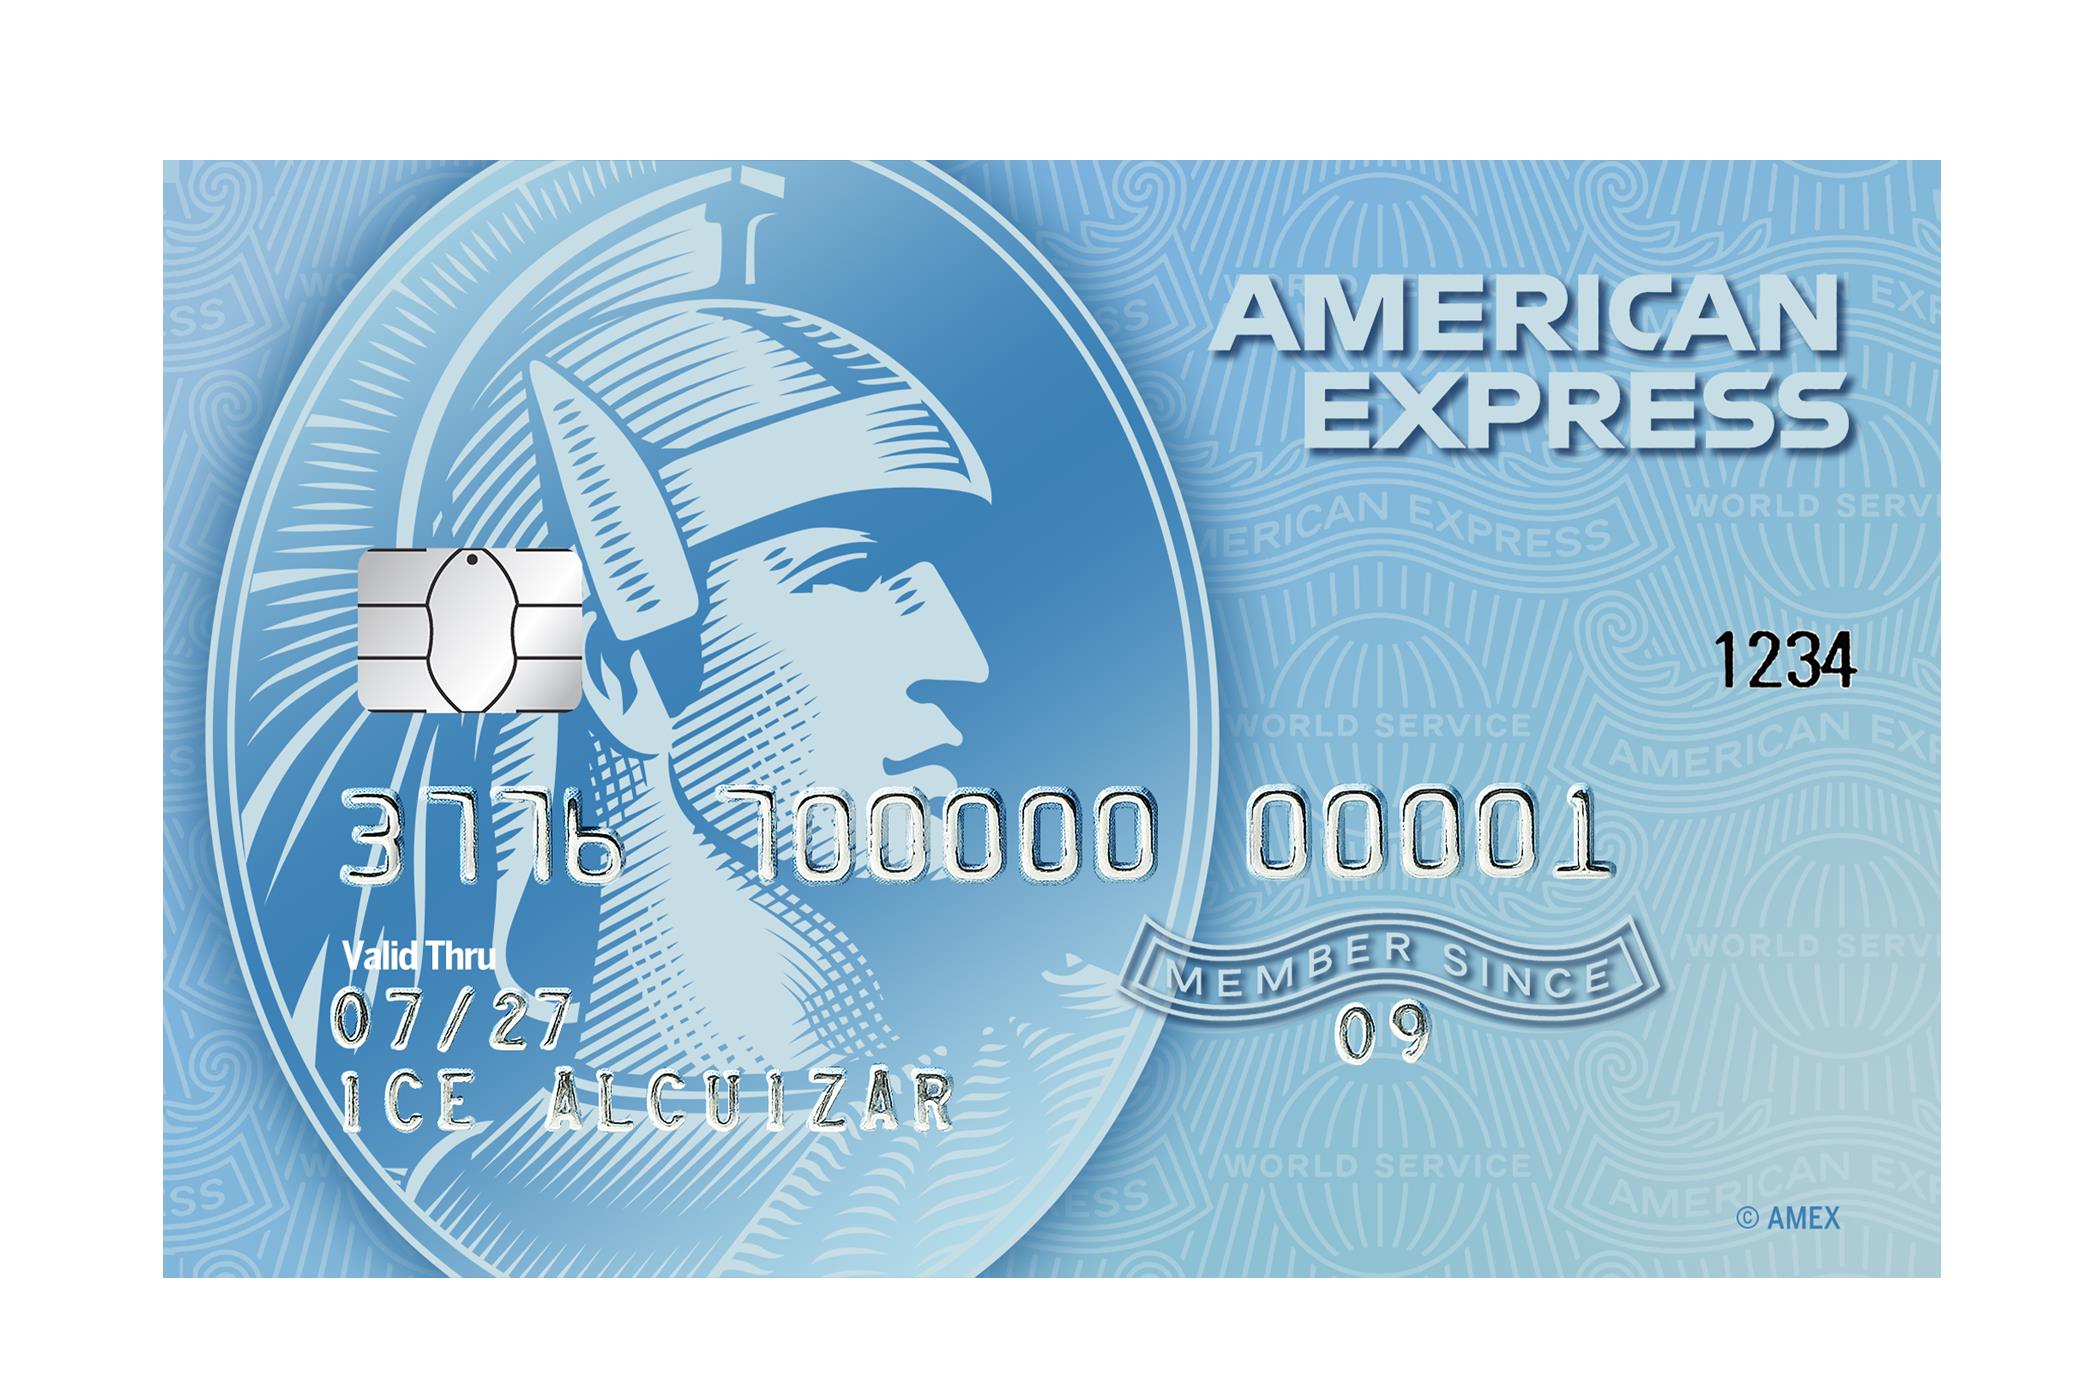 How To Apply Amex Credit Card